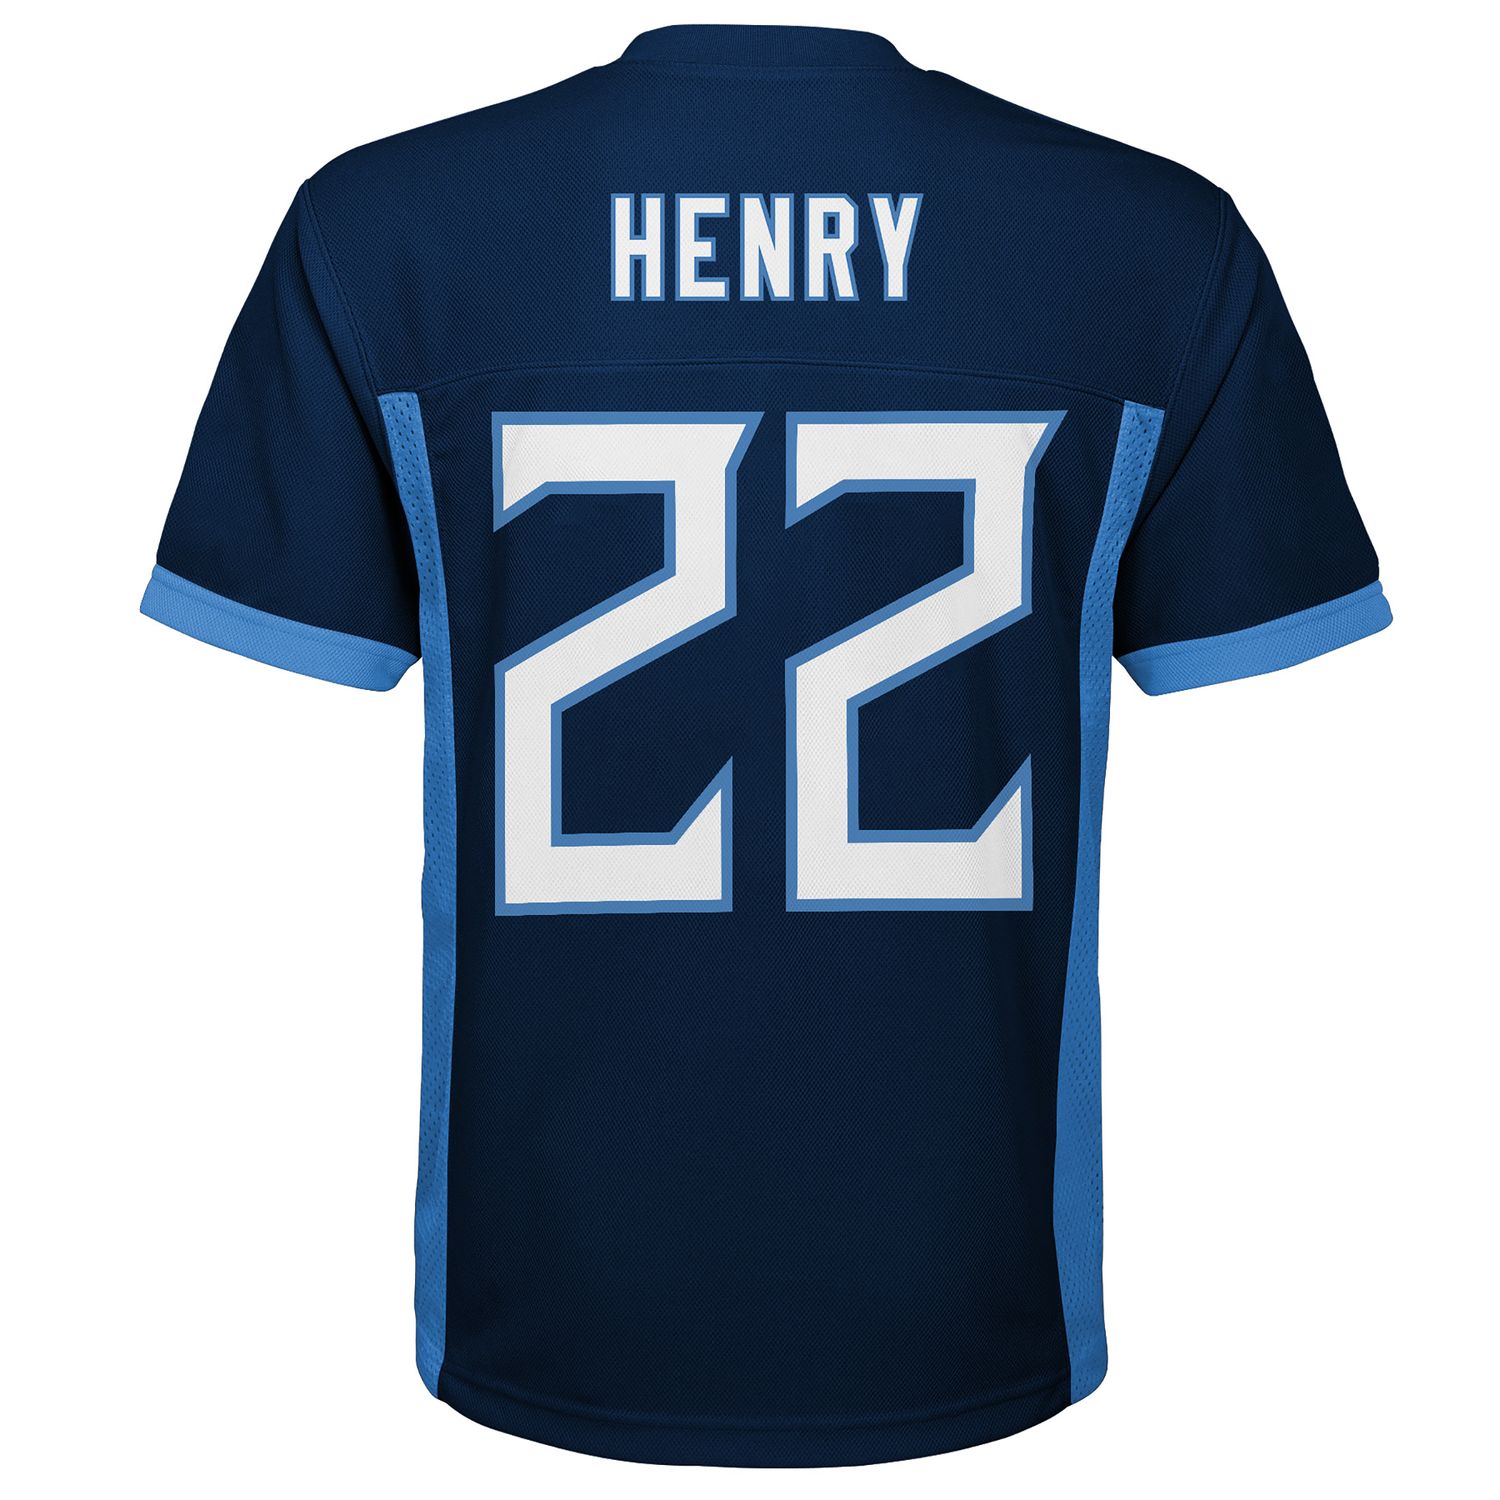 derrick henry tennessee titans jersey number